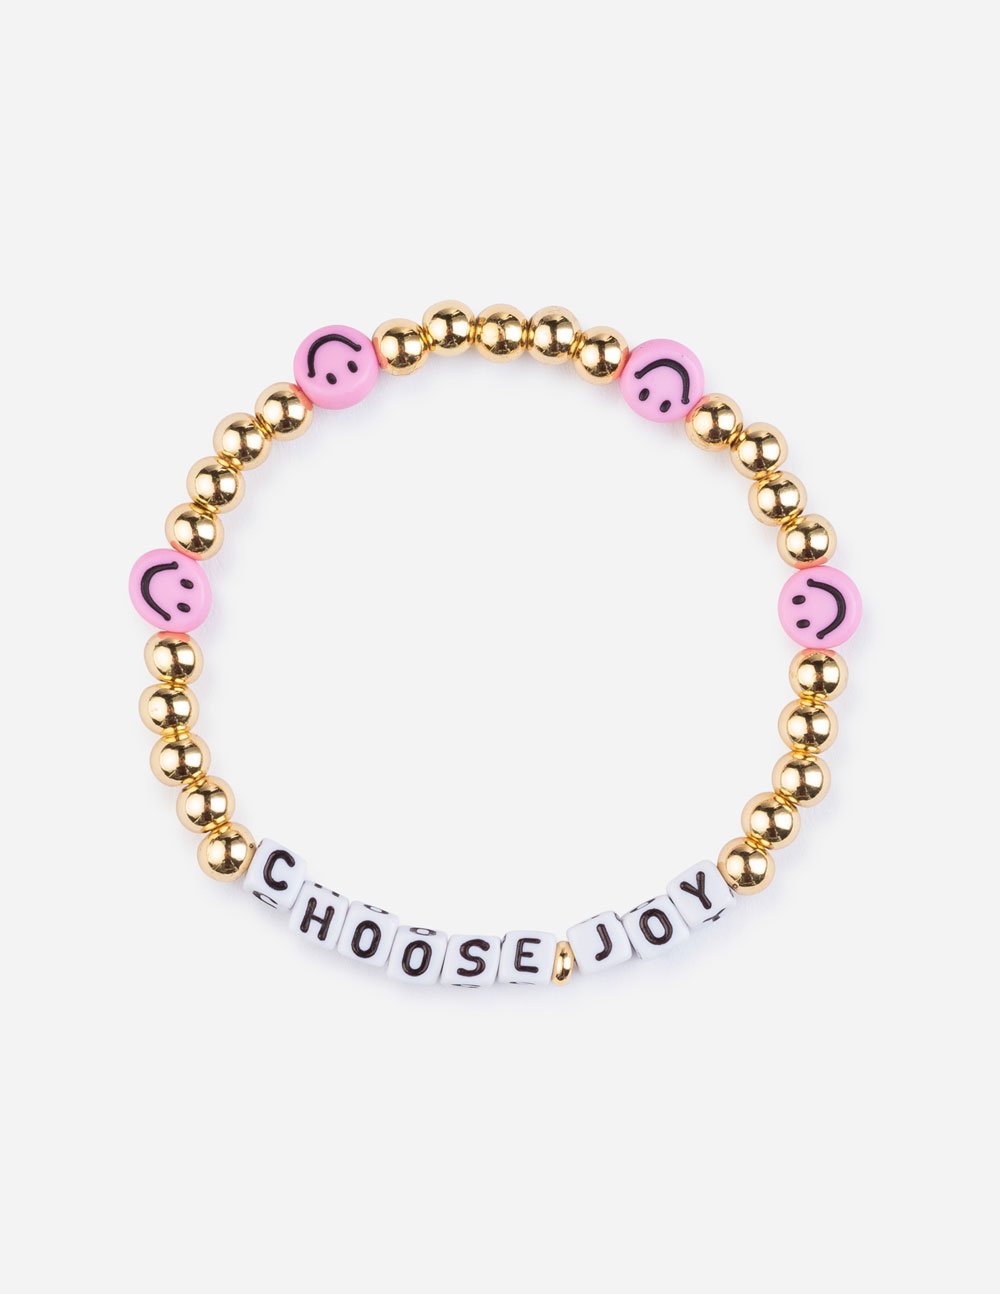 Inspired by bracelet worn by Taylor and friendship bracelets traded at The  Eras Tour; this trending “TNT” bracelet, which stands for ... | Instagram